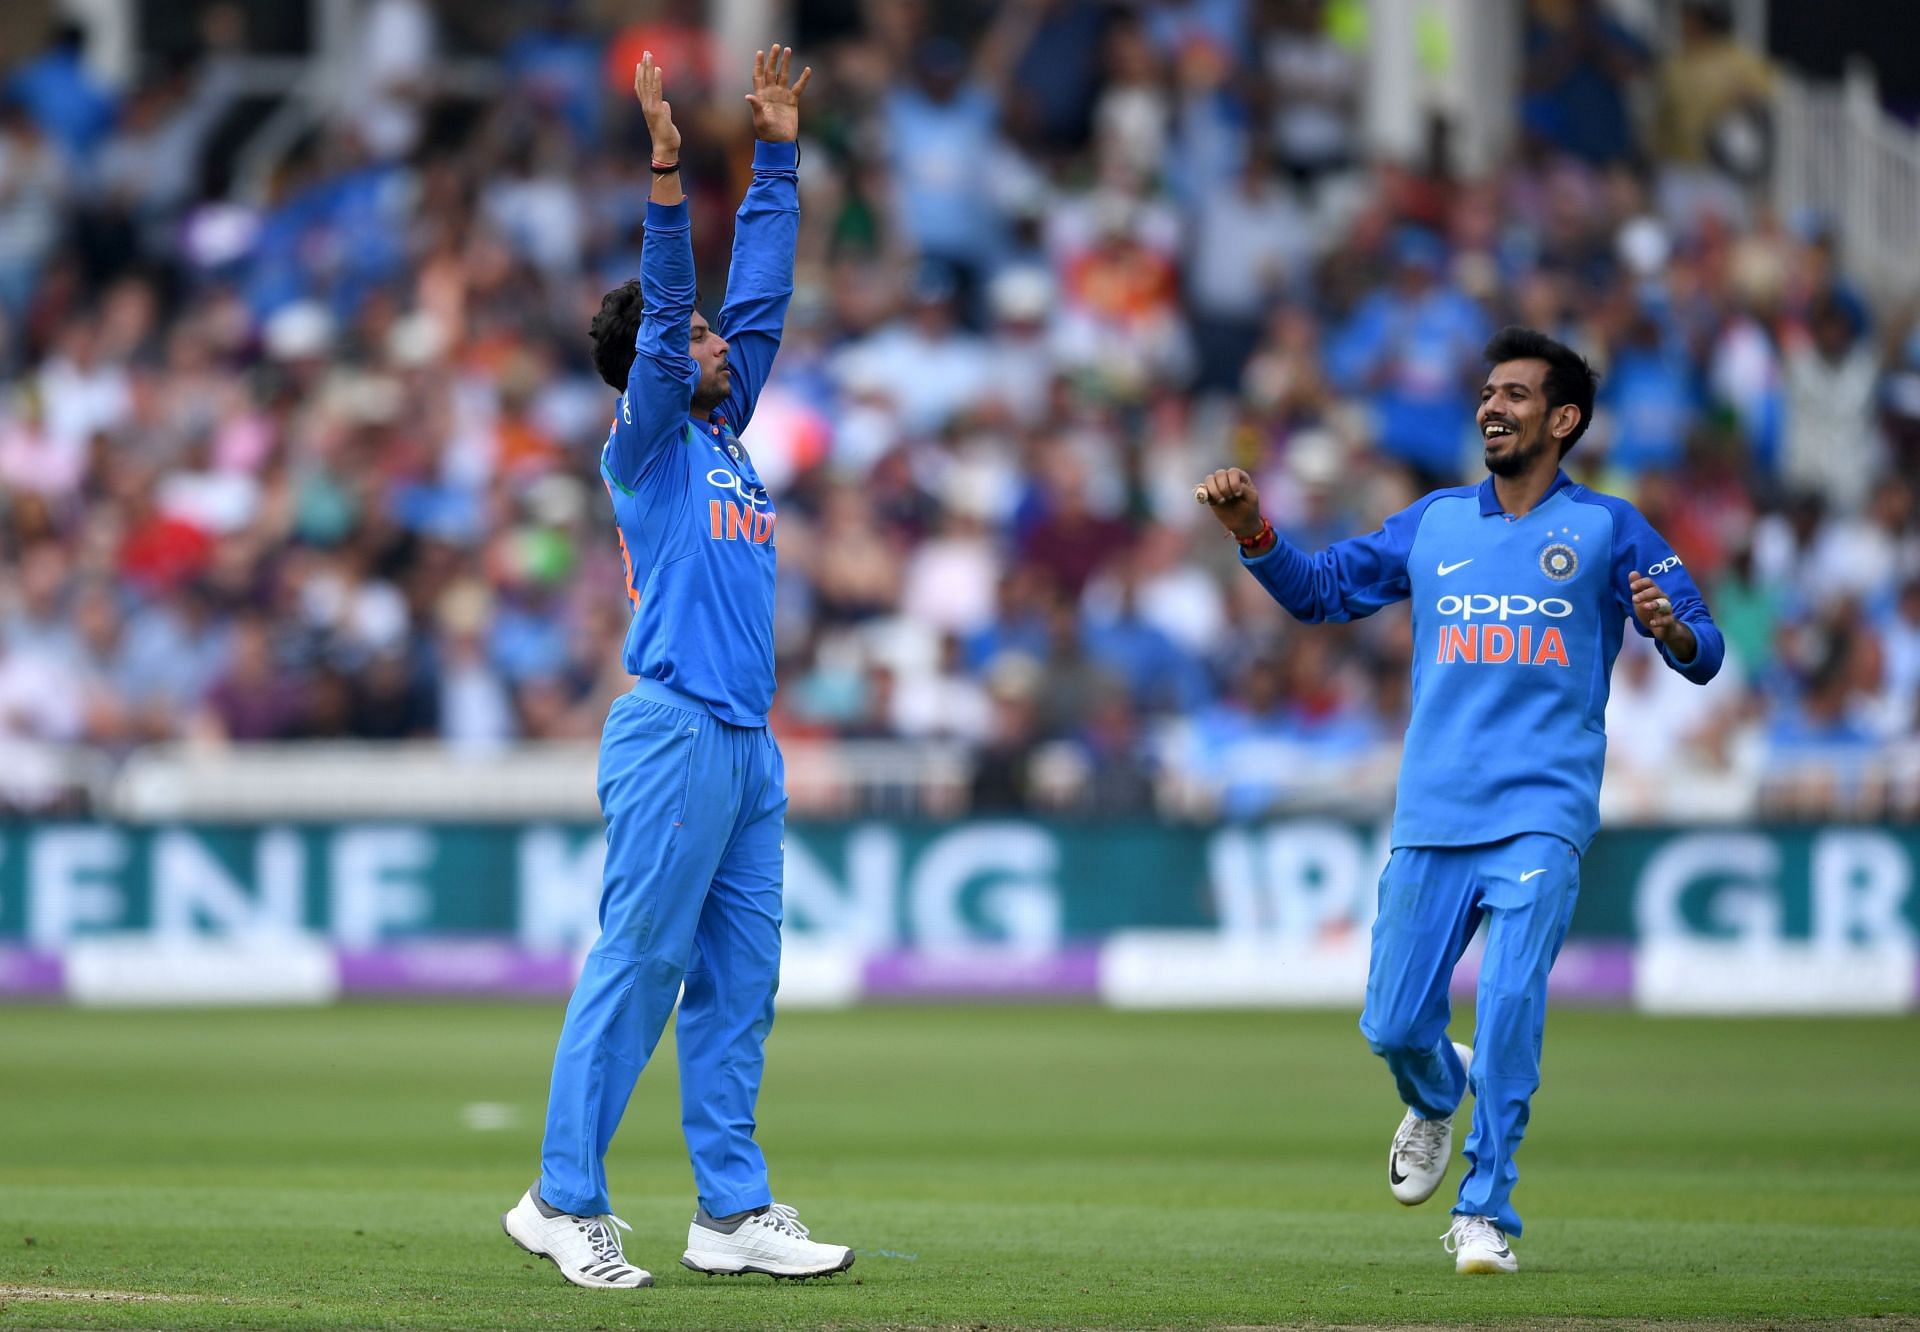 Kuldeep Yadav and Yuzvendra Chahal have been a hugely successful spin-bowling pair in the past